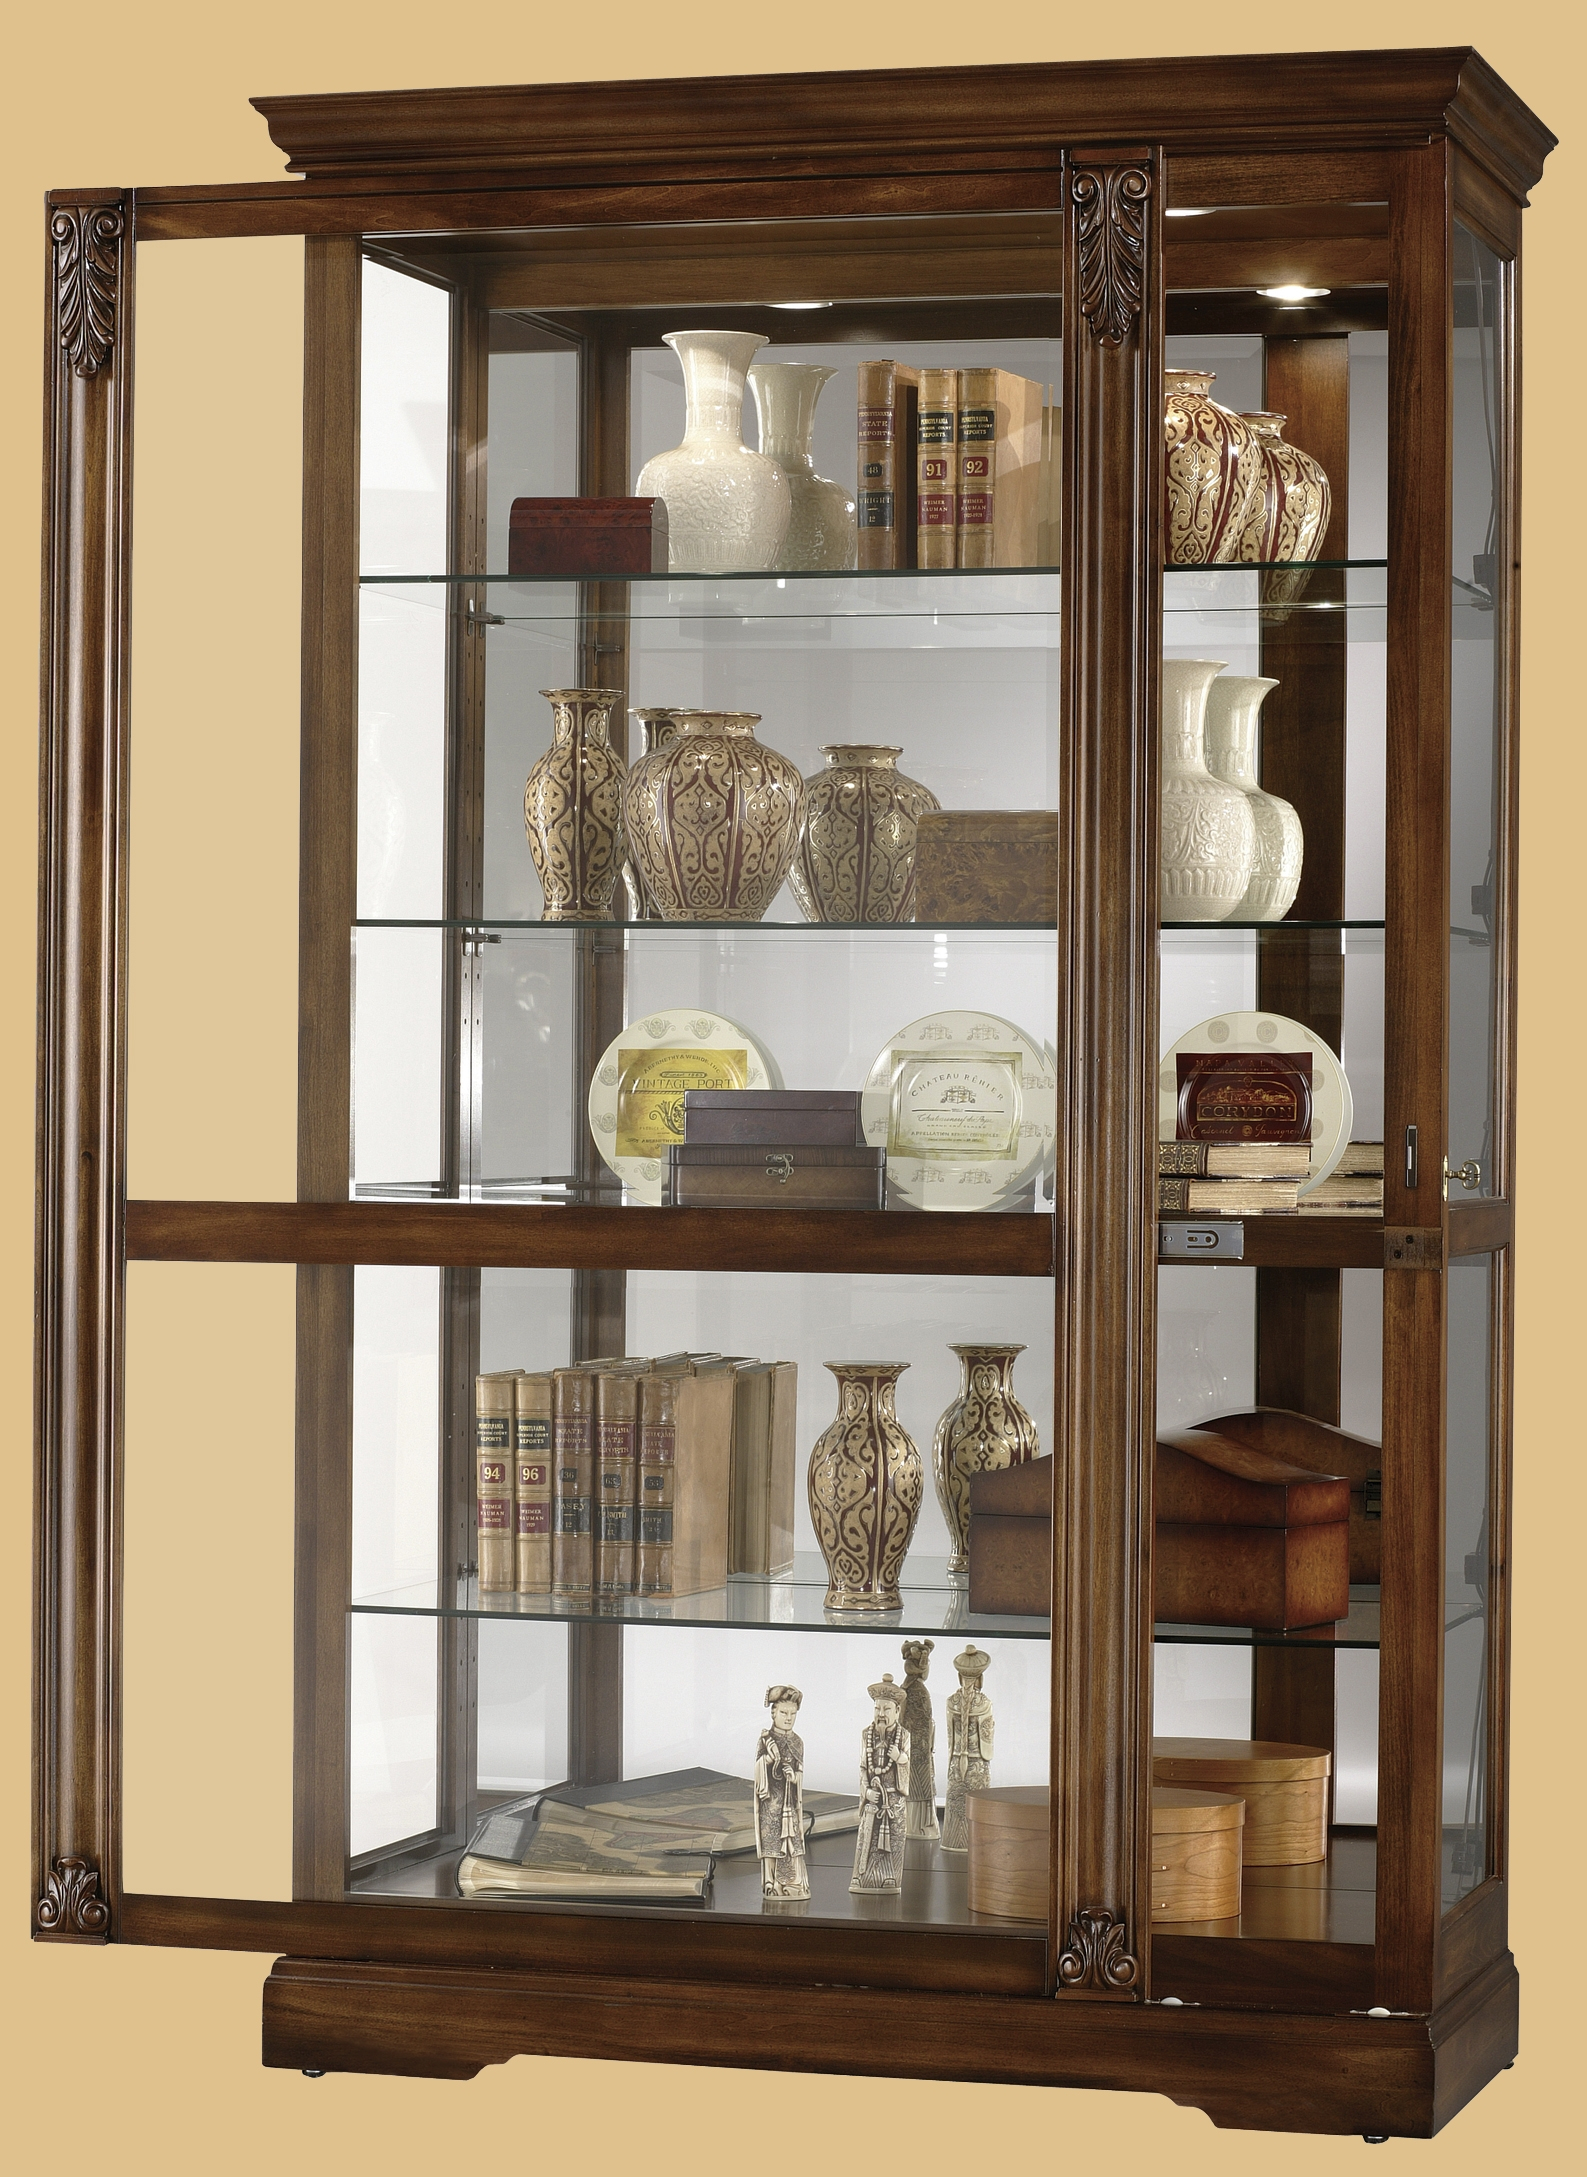 Howard Miller Ramsdell Walnut Curio Display Cabinet 680 473 within sizing 1587 X 2177